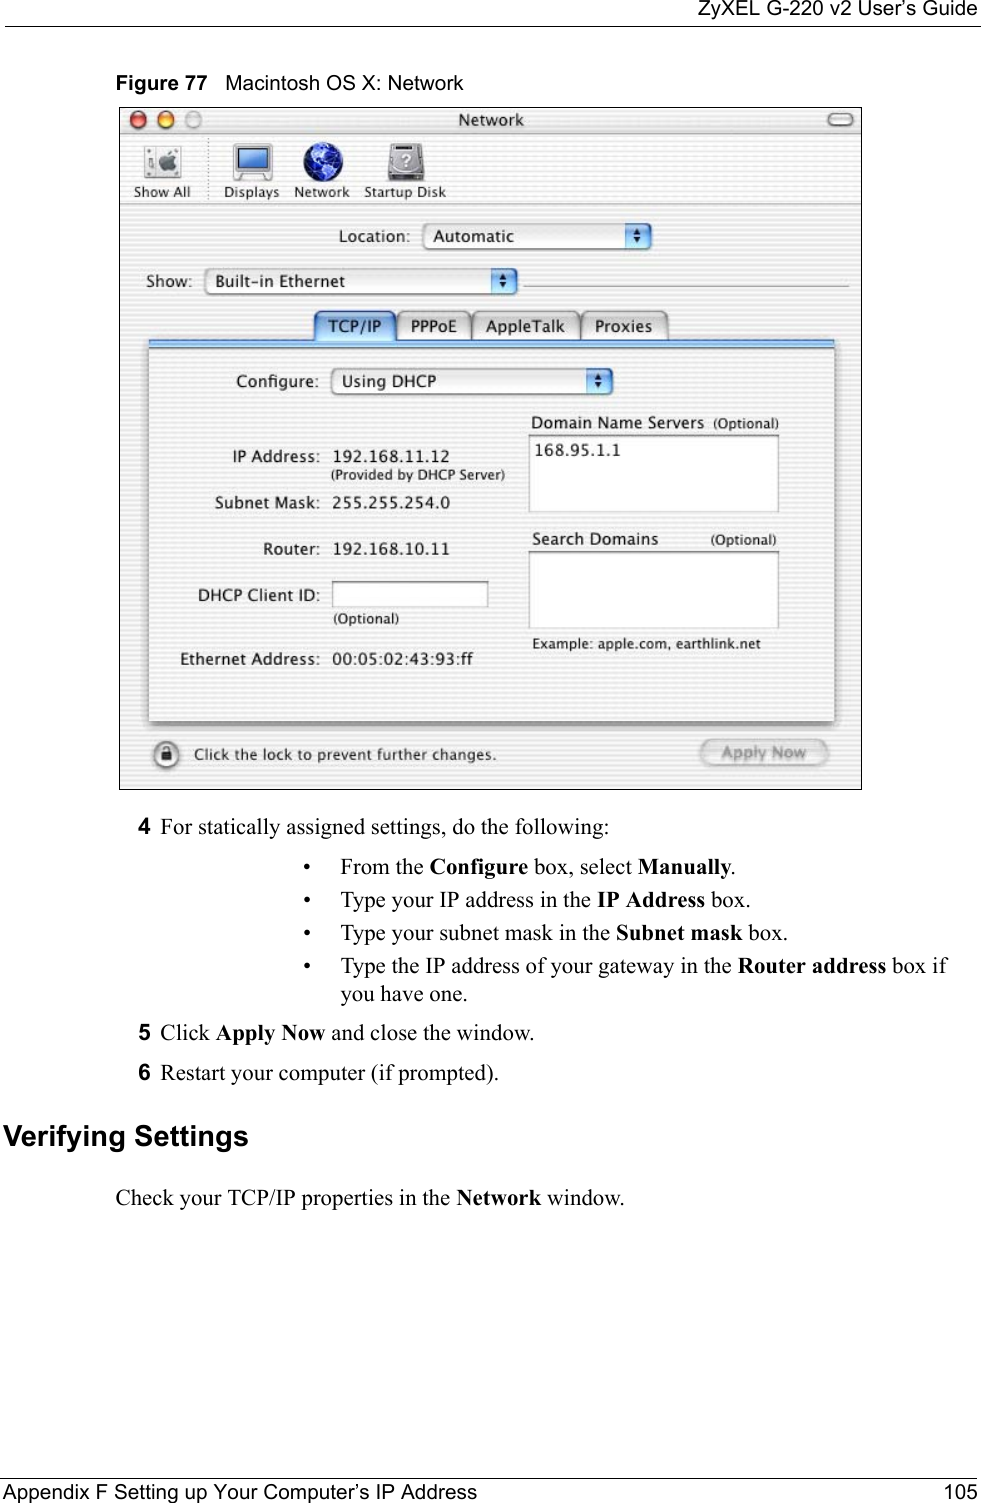 ZyXEL G-220 v2 User’s GuideAppendix F Setting up Your Computer’s IP Address 105Figure 77   Macintosh OS X: Network4For statically assigned settings, do the following:•From the Configure box, select Manually.• Type your IP address in the IP Address box.• Type your subnet mask in the Subnet mask box.• Type the IP address of your gateway in the Router address box if you have one.5Click Apply Now and close the window.6Restart your computer (if prompted).Verifying SettingsCheck your TCP/IP properties in the Network window.